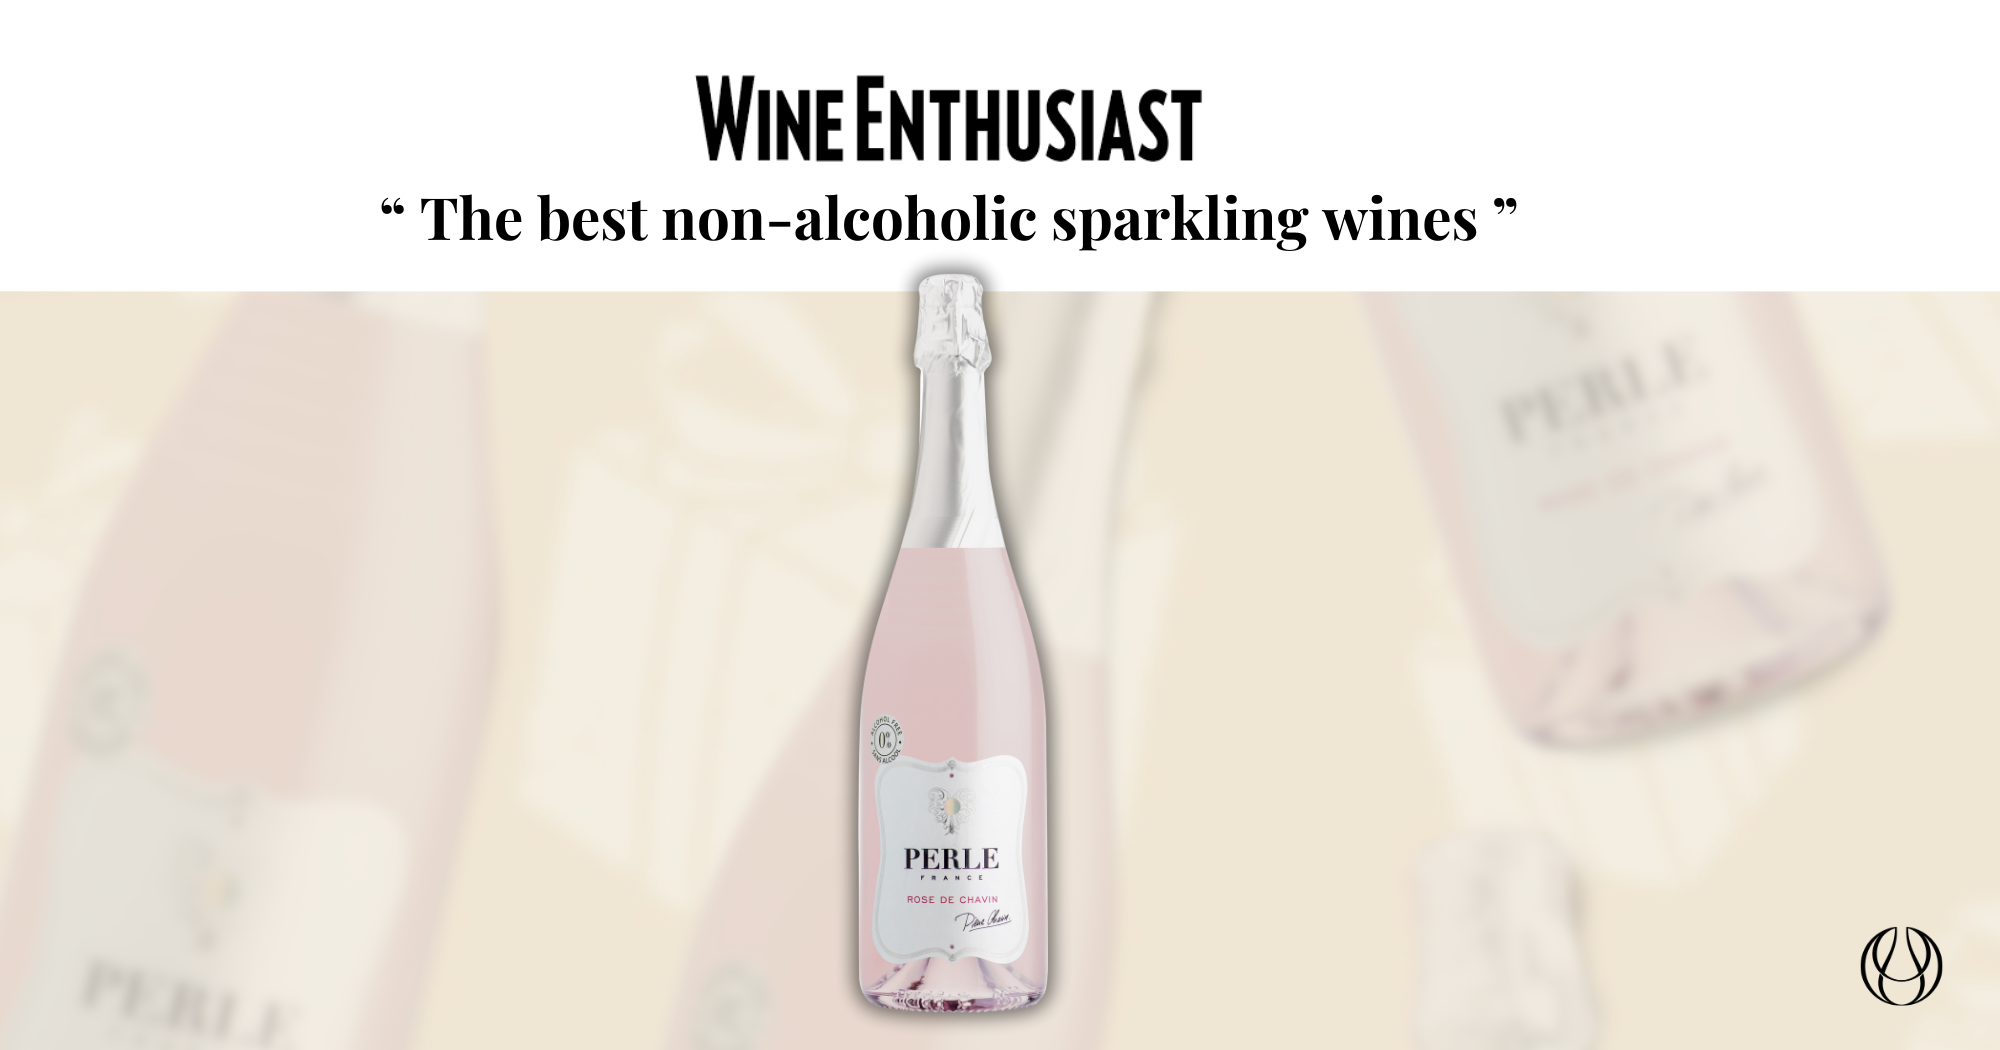 Chavin - Perle Rosu00e9 voted best non-alcoholic by Wine Enthusiast